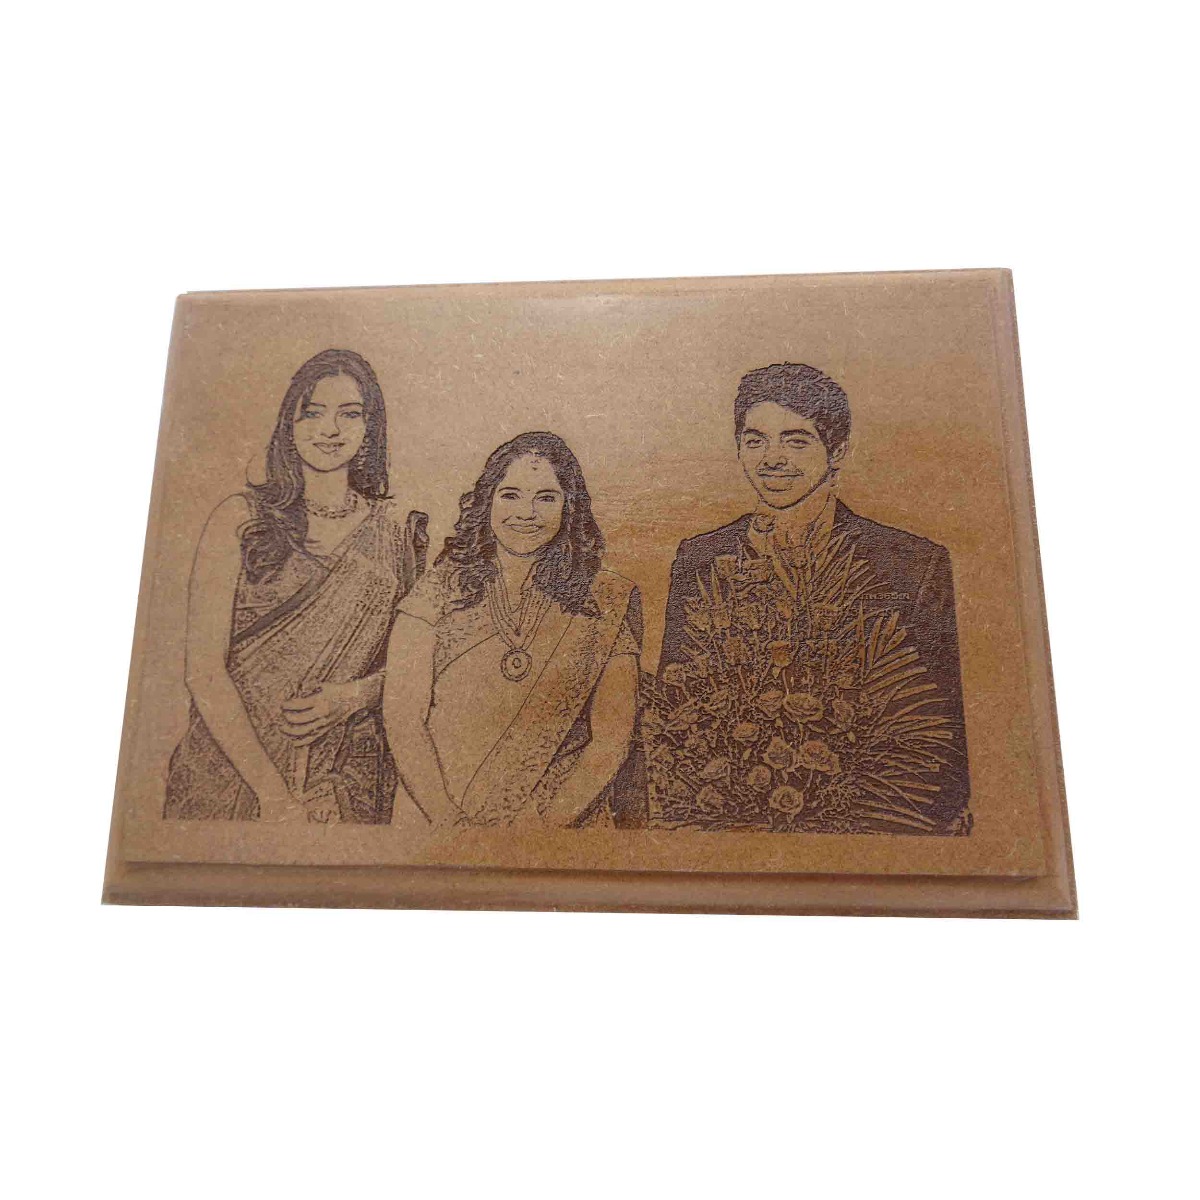 Penhouse.in Model: 15511 Square shape wooden frame with Photo engraving